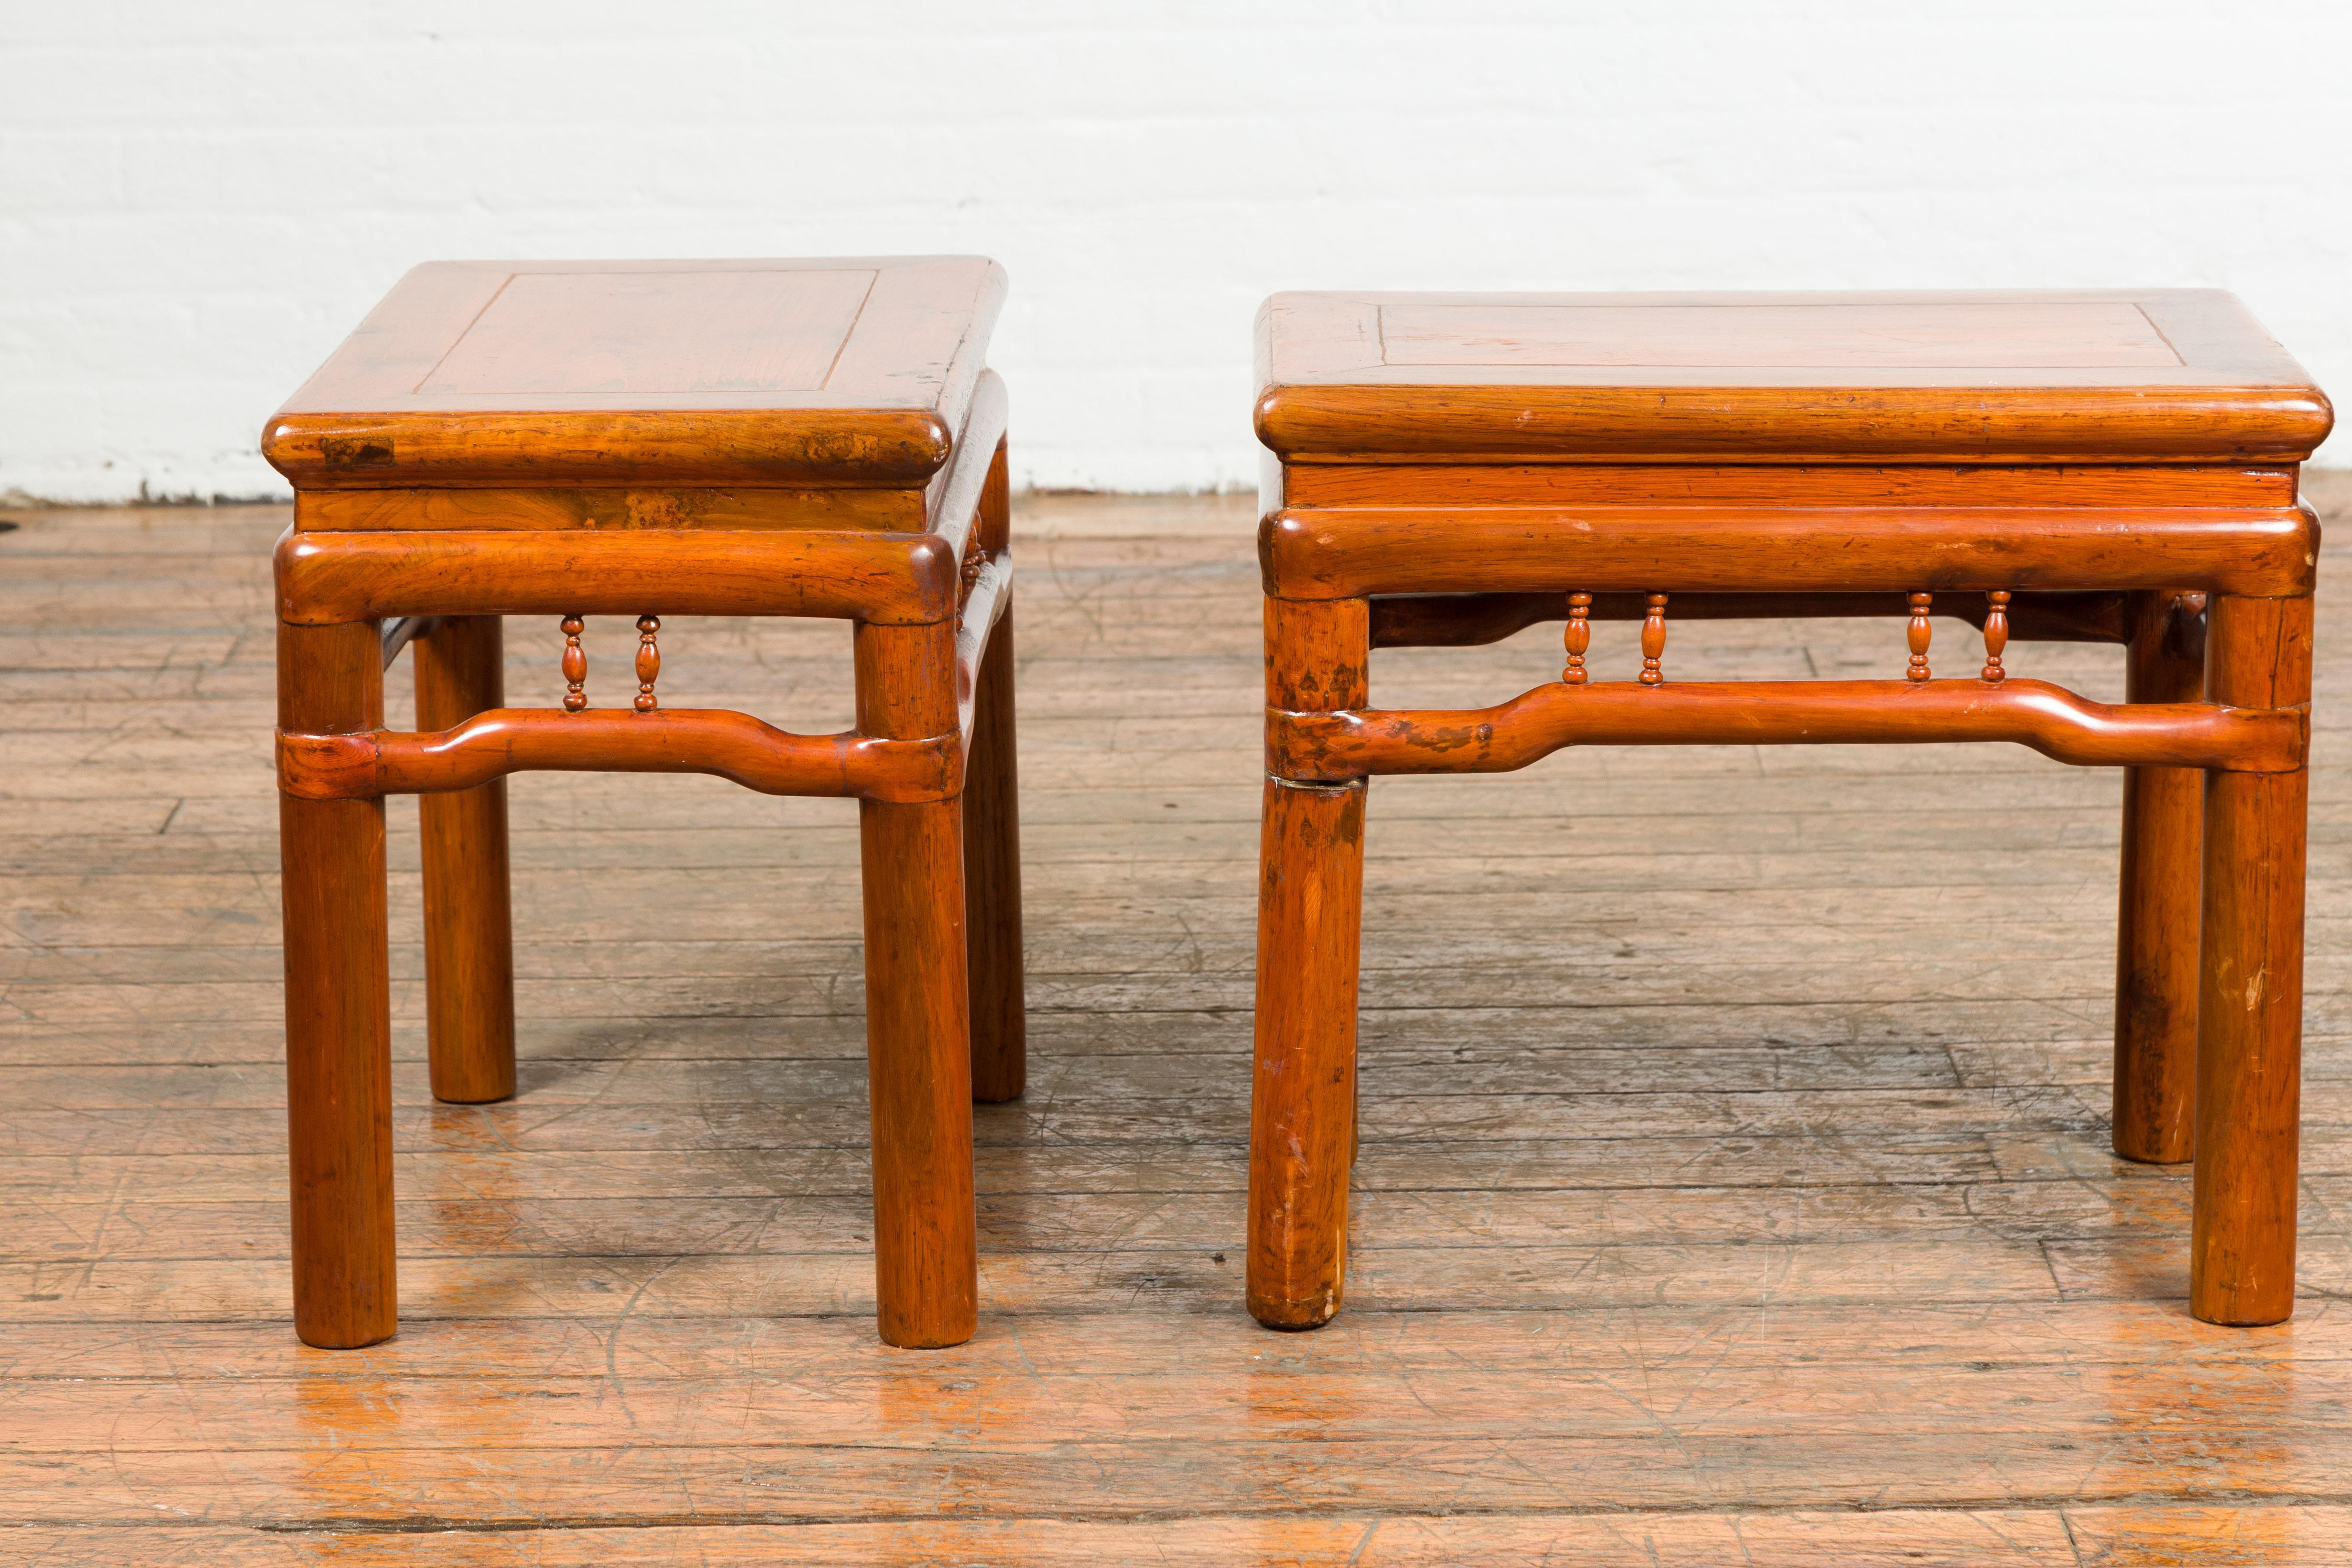 Pair of Chinese Qing Dynasty 19th Century Side Tables with Humpback Stretchers For Sale 5